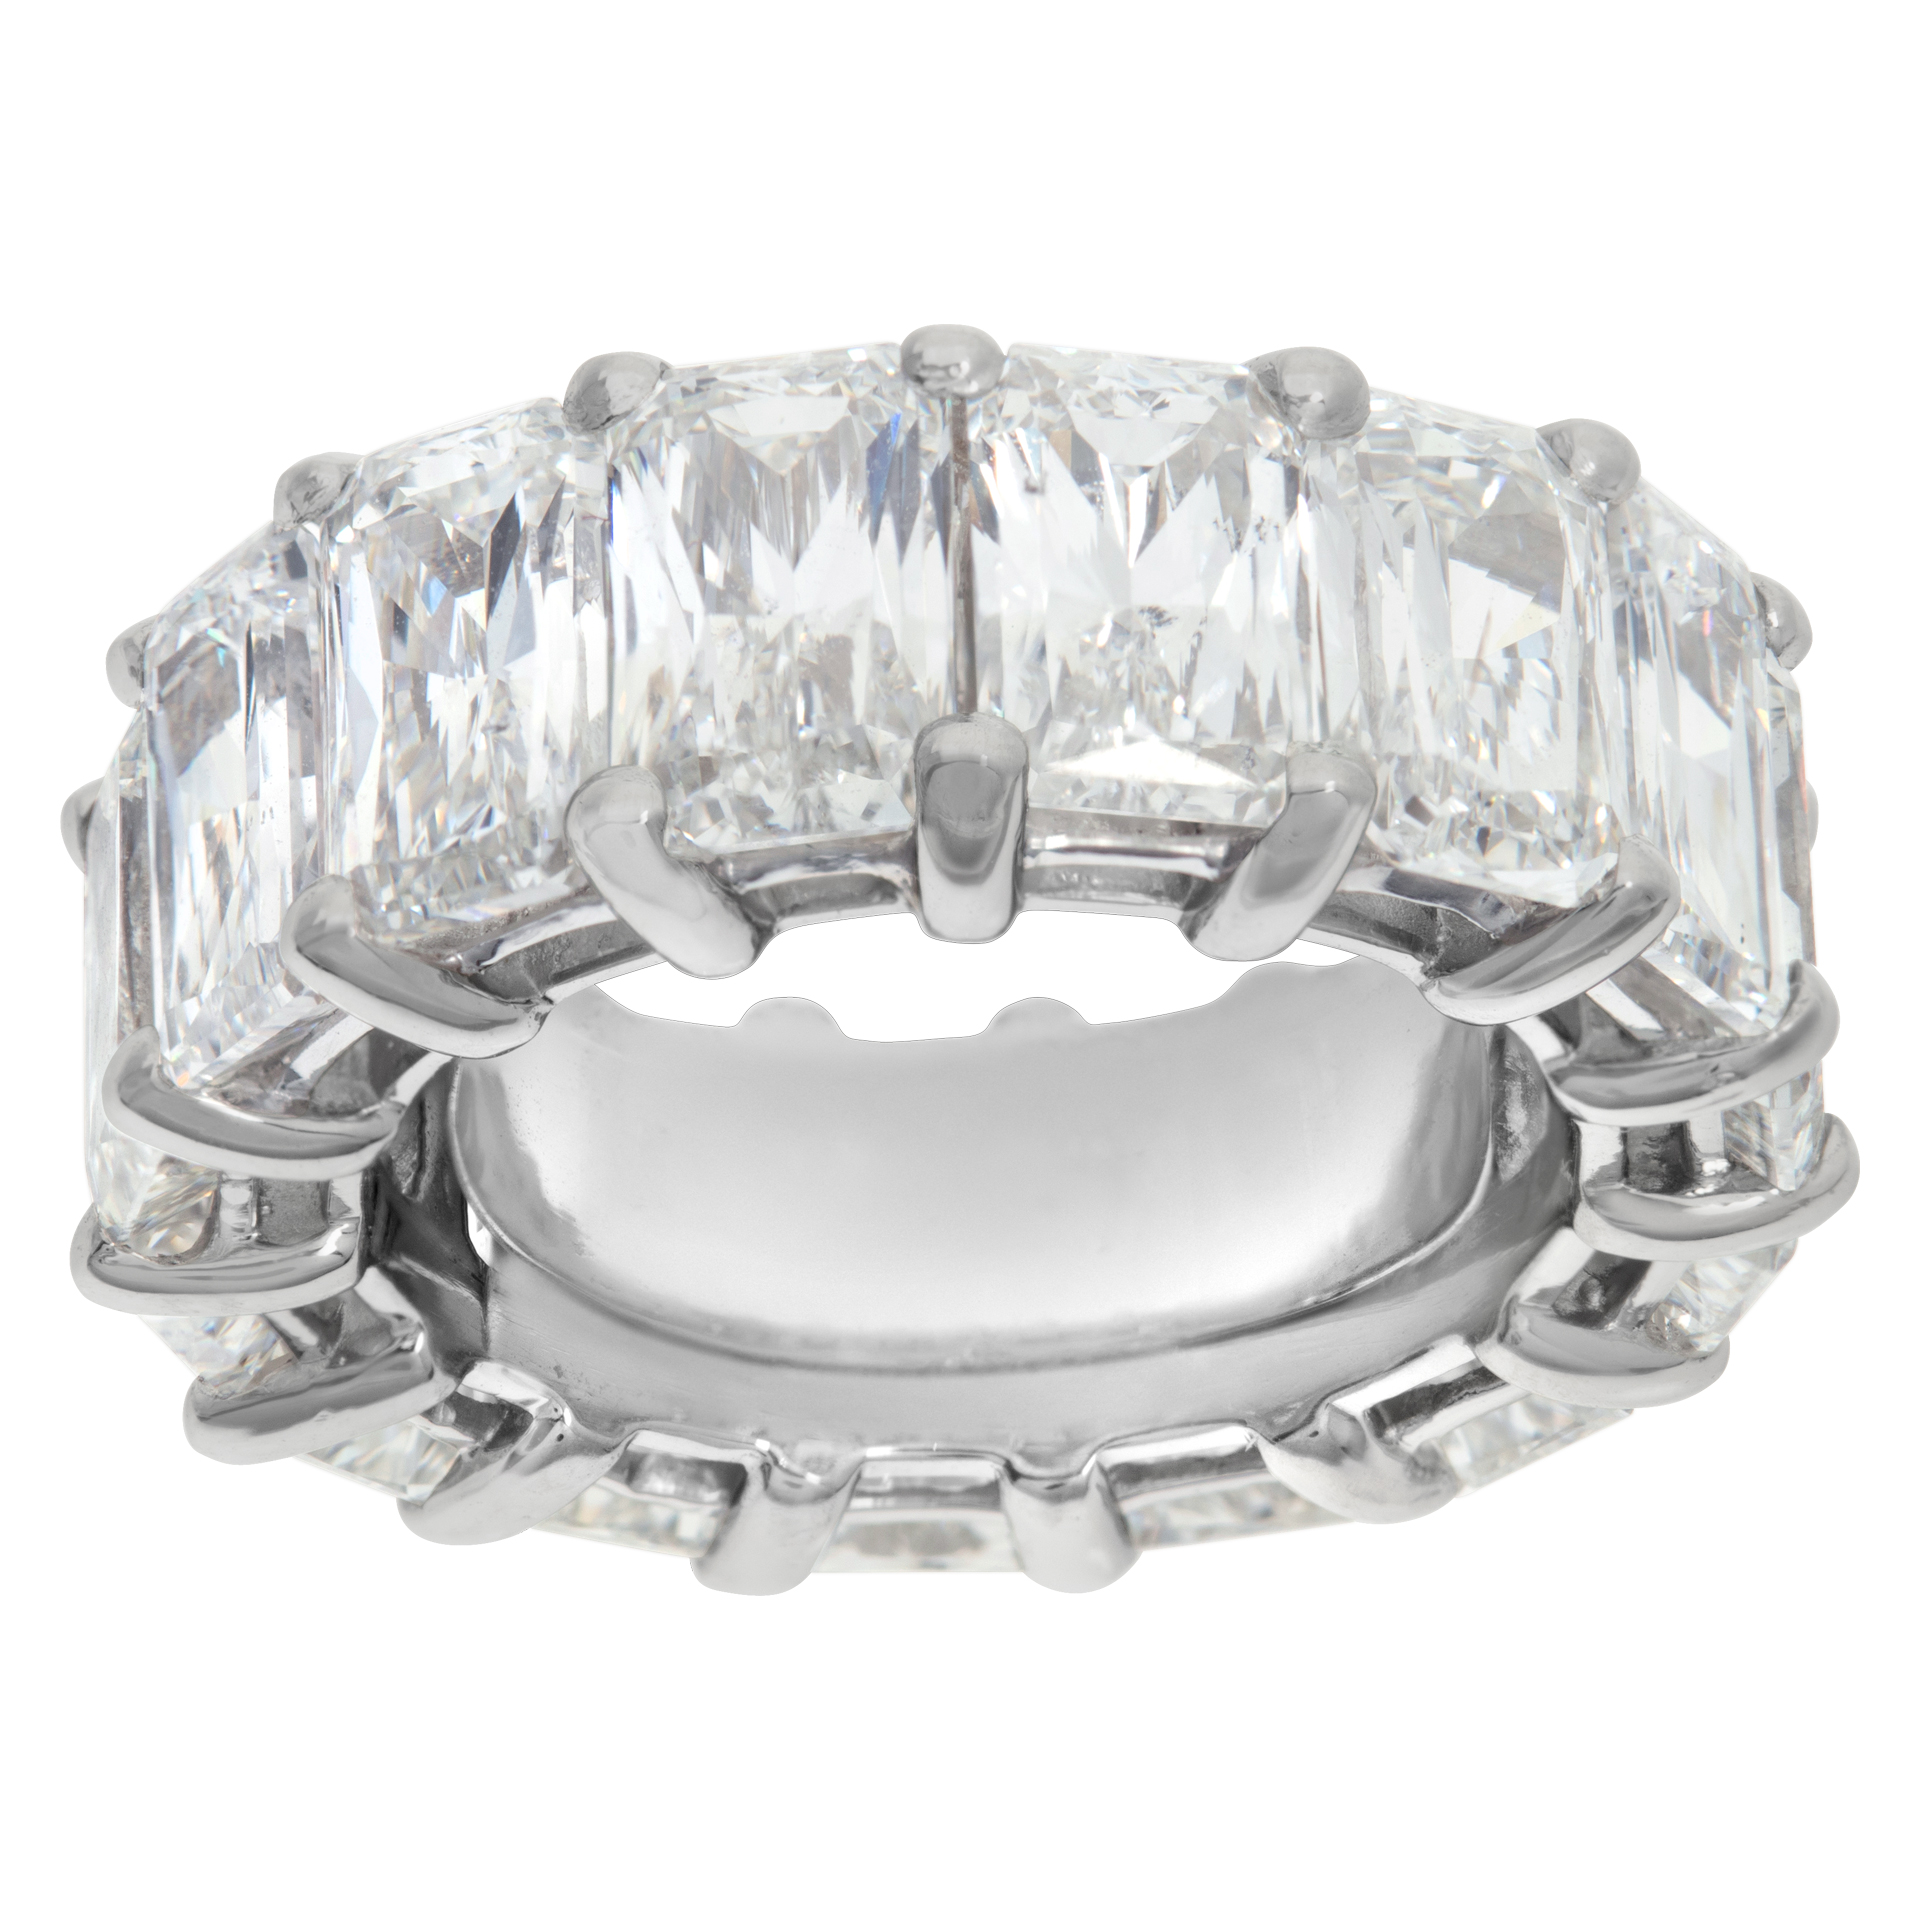 GIA certified, cut-cornered rectangular modified brilliant diamonds Eternity band in platinum. Approx. Weight: 15 carats.